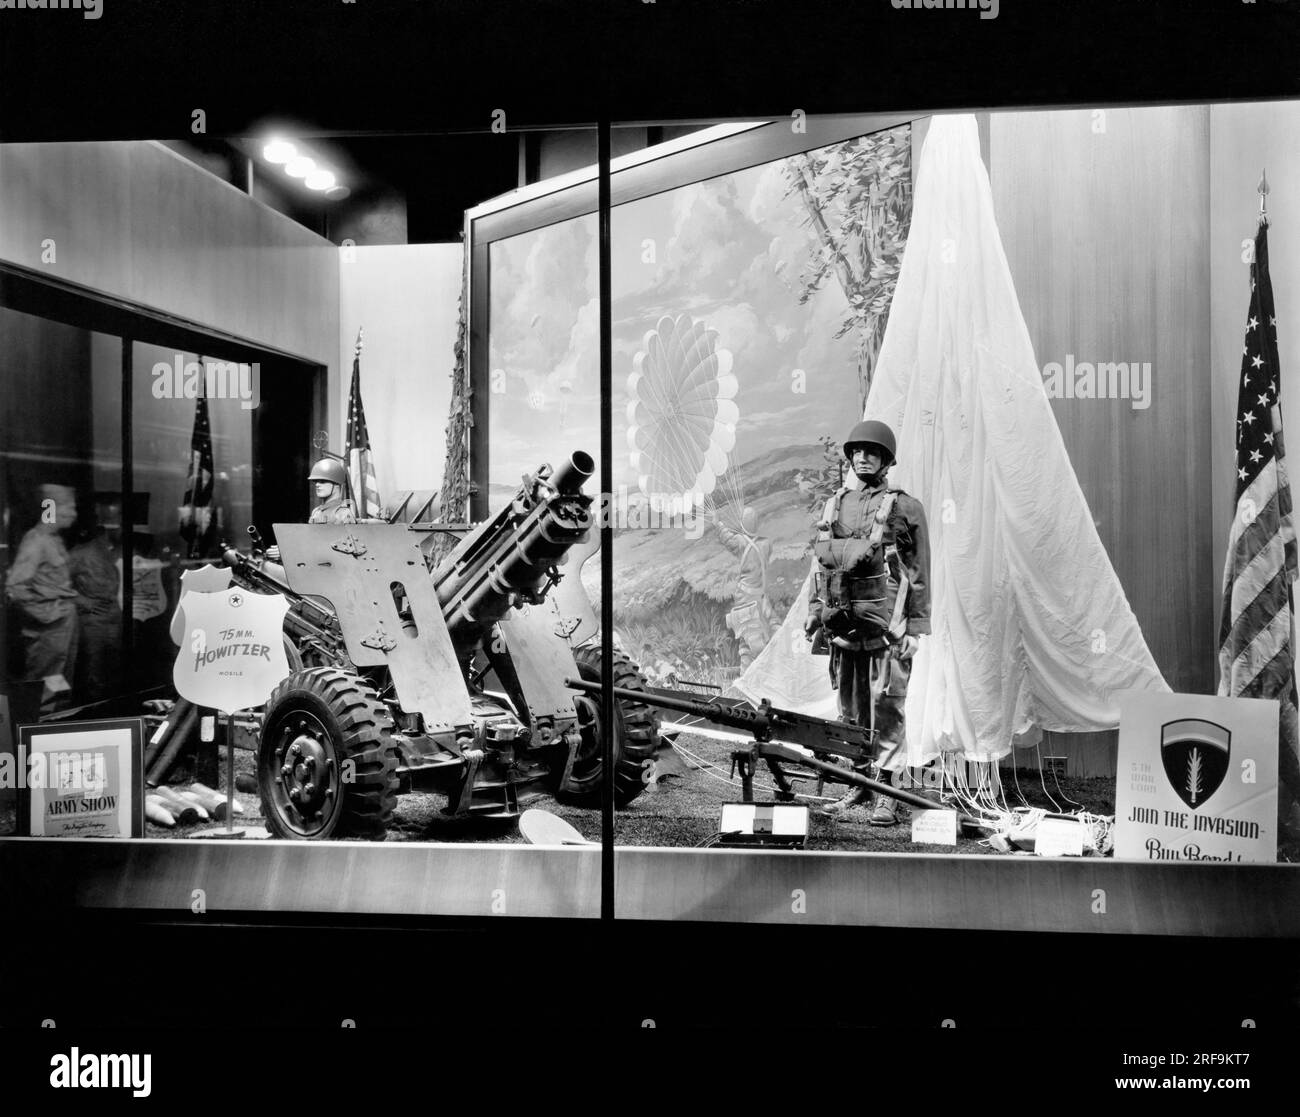 Minneapolis, Minnesota:   June 12, 1944. Less than a week after D-Day, President Roosevelt calls upon the country to purchase Treasury bonds as part of the 5th War Loan drive. The Dayton Company, a major department store, has a window display supporting the drive, and is also the sponser of  the Army Show featuring the 'This Is The Army, Mrs. Jones',  display of war material. Stock Photo